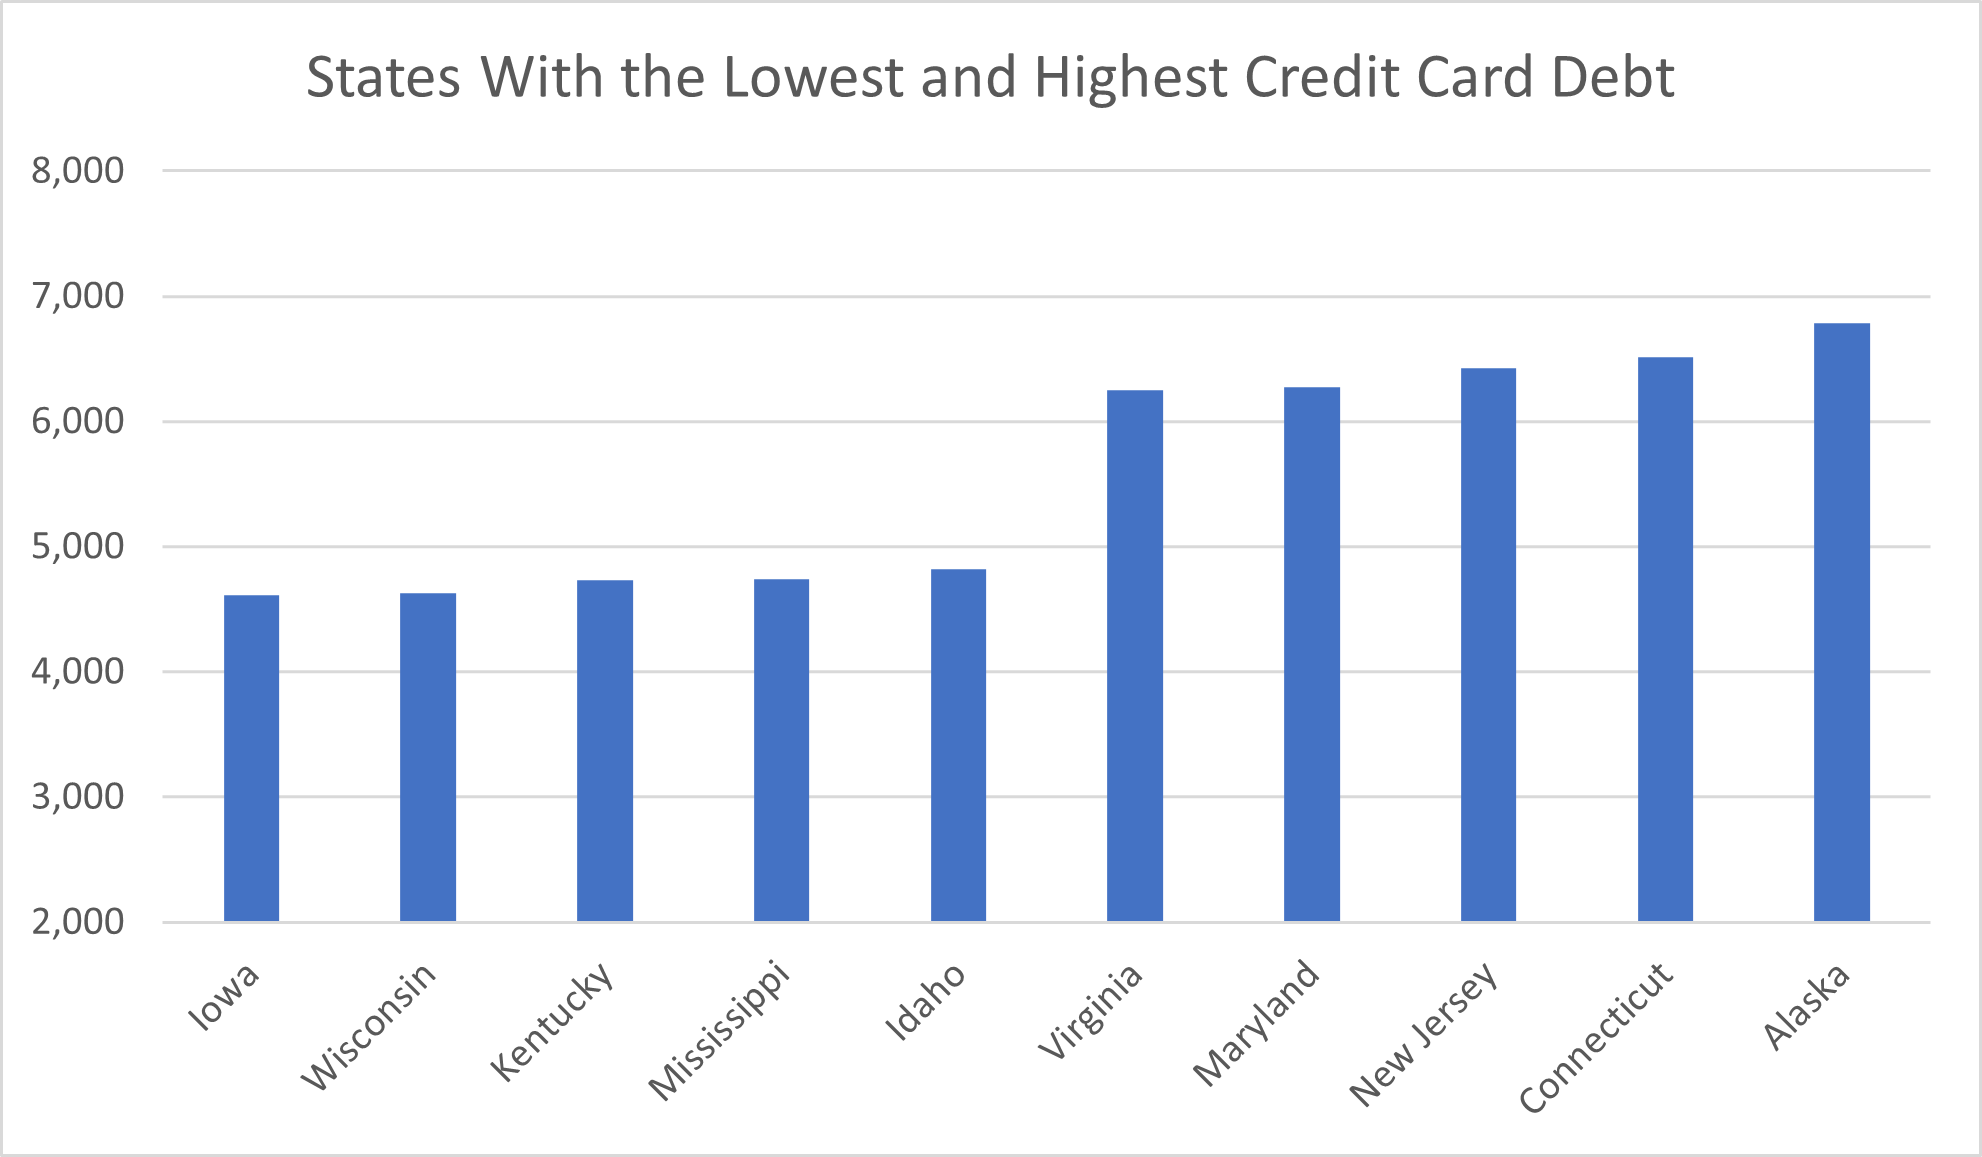 States With the Lowest and Highest Credit Card Debt